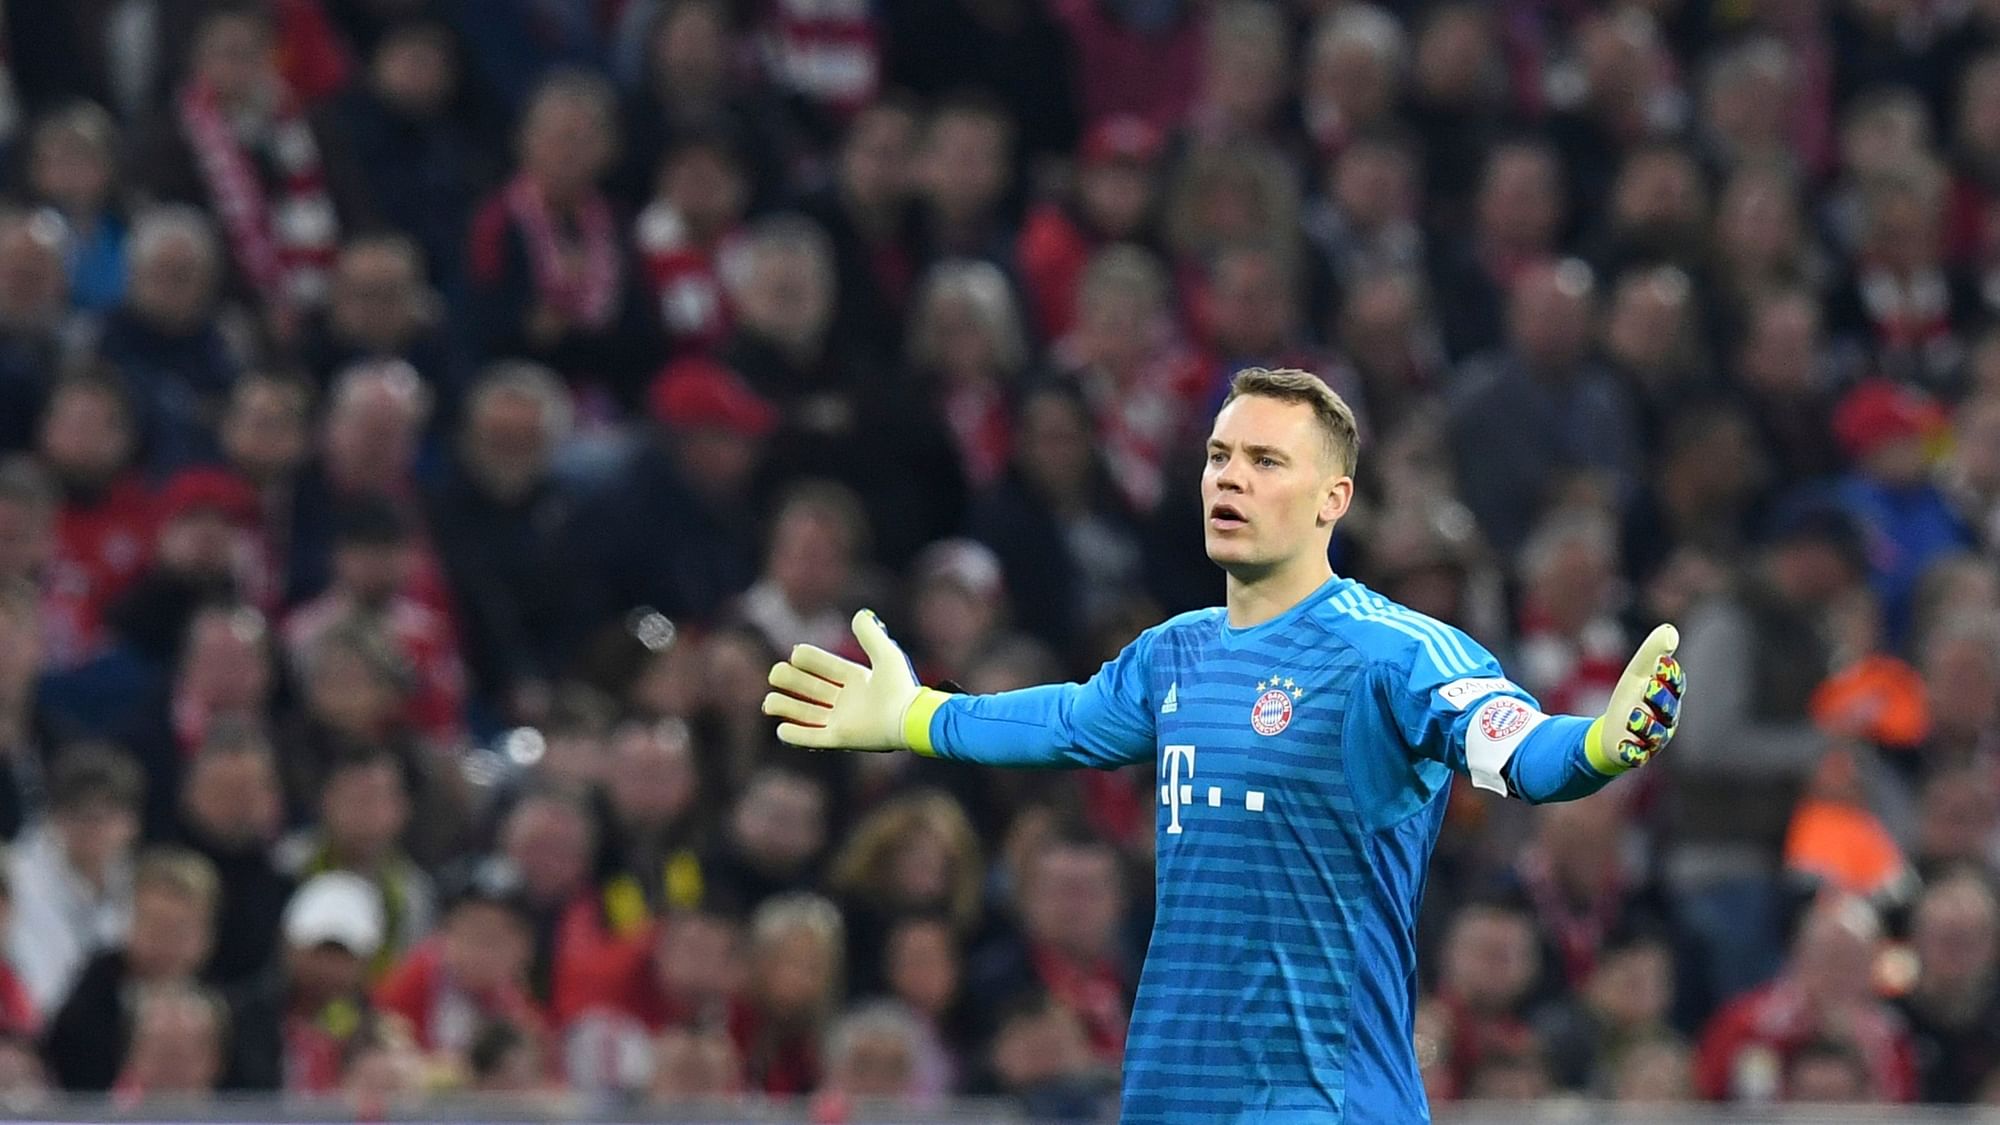 Bayern Munich goalkeeper Manuel Neuer will miss about two weeks with a muscle fiber tear in his calf.